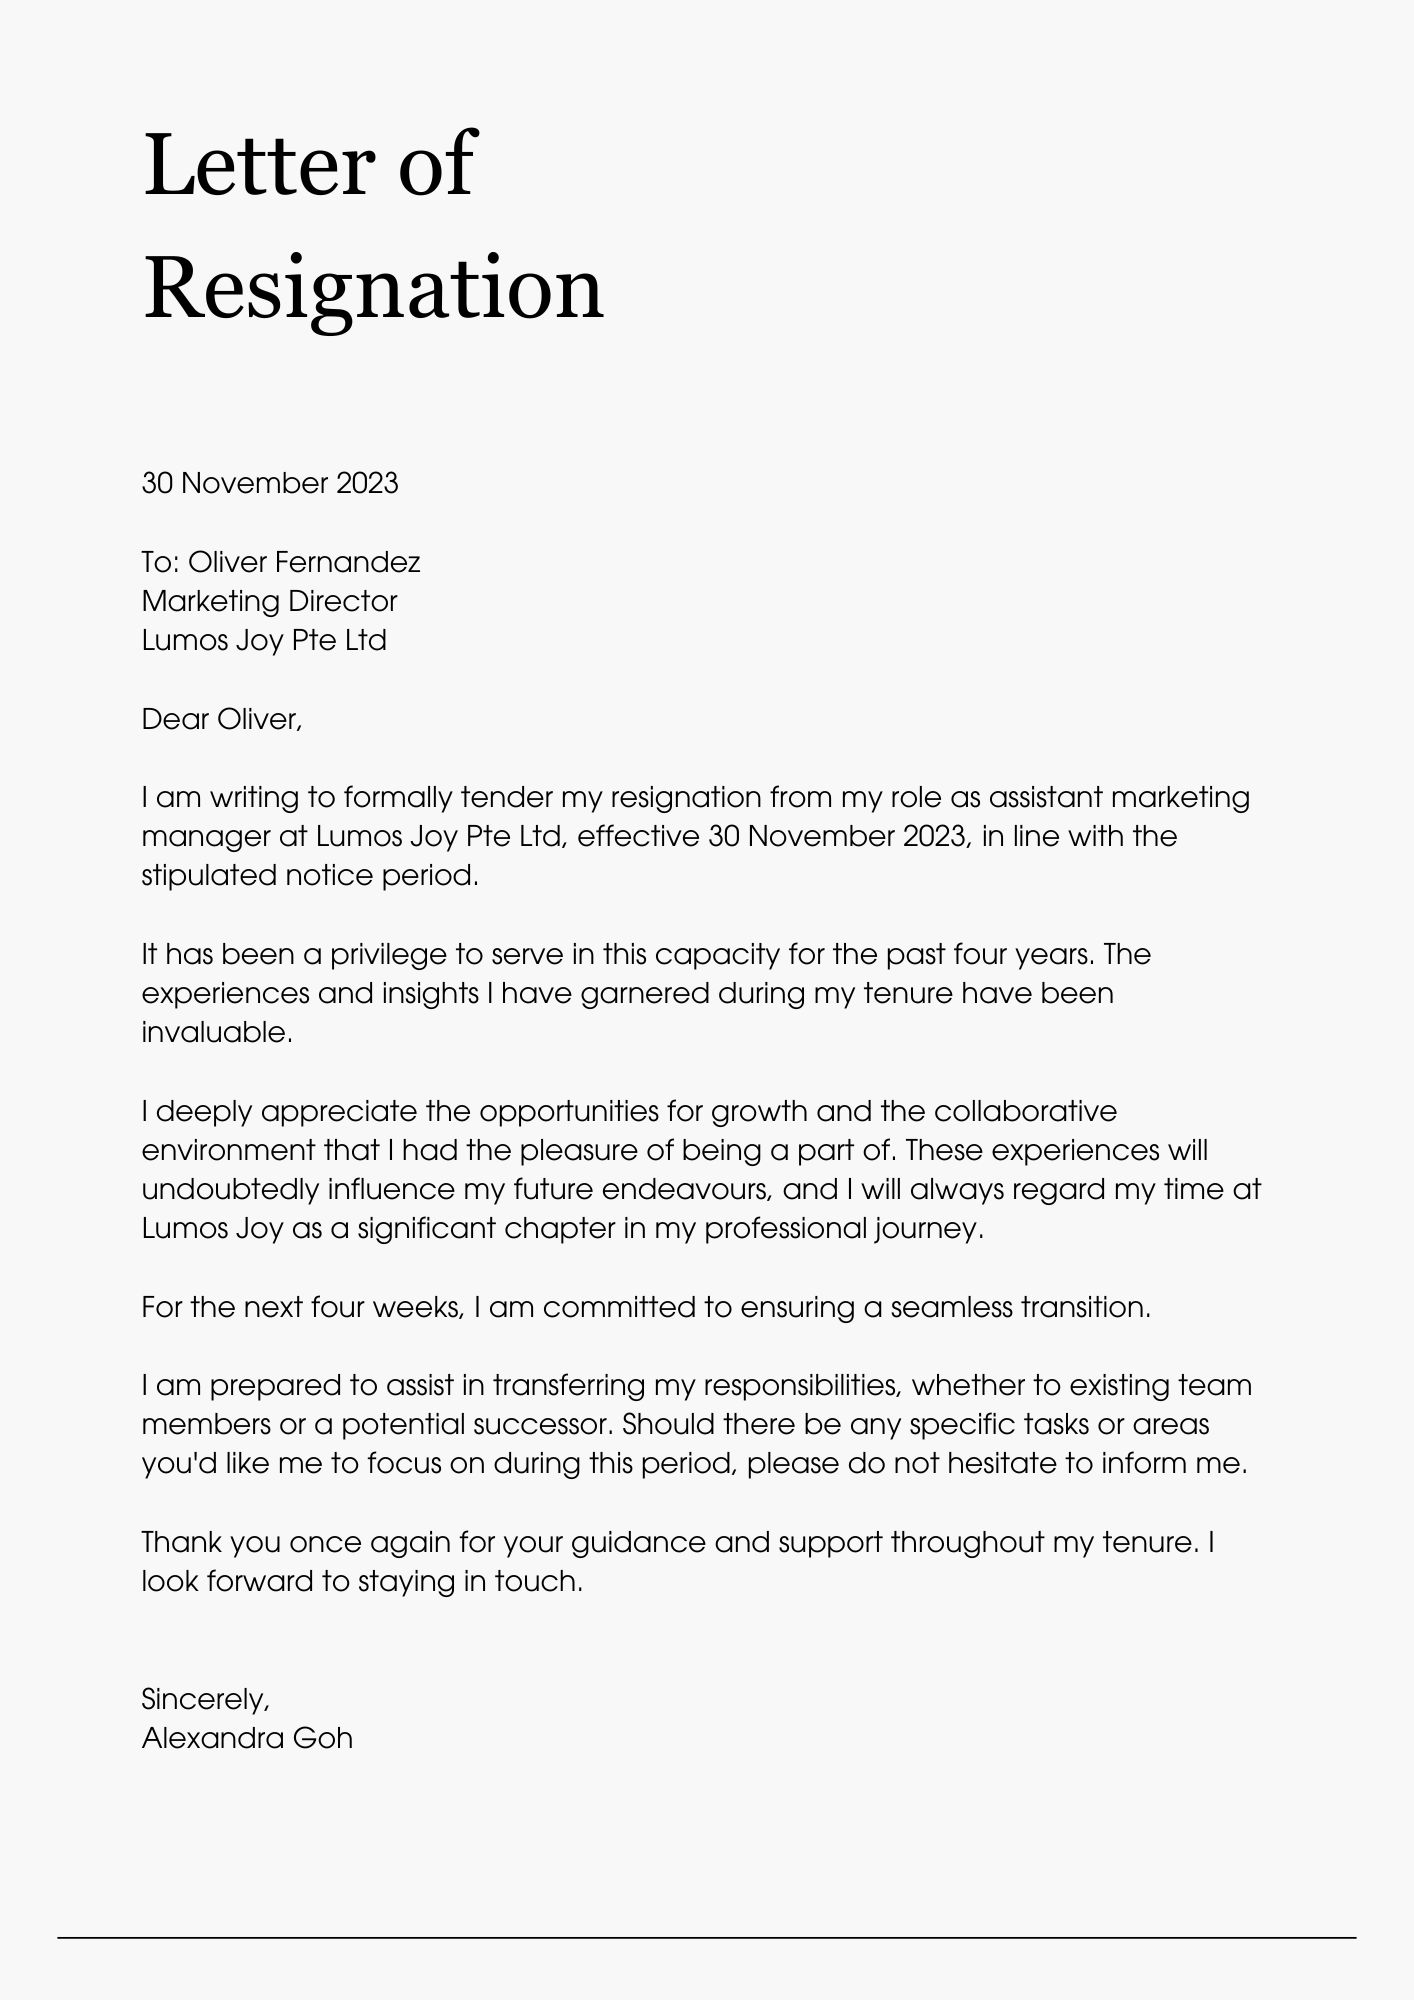 Here is an example of how a resignation letter would look like.